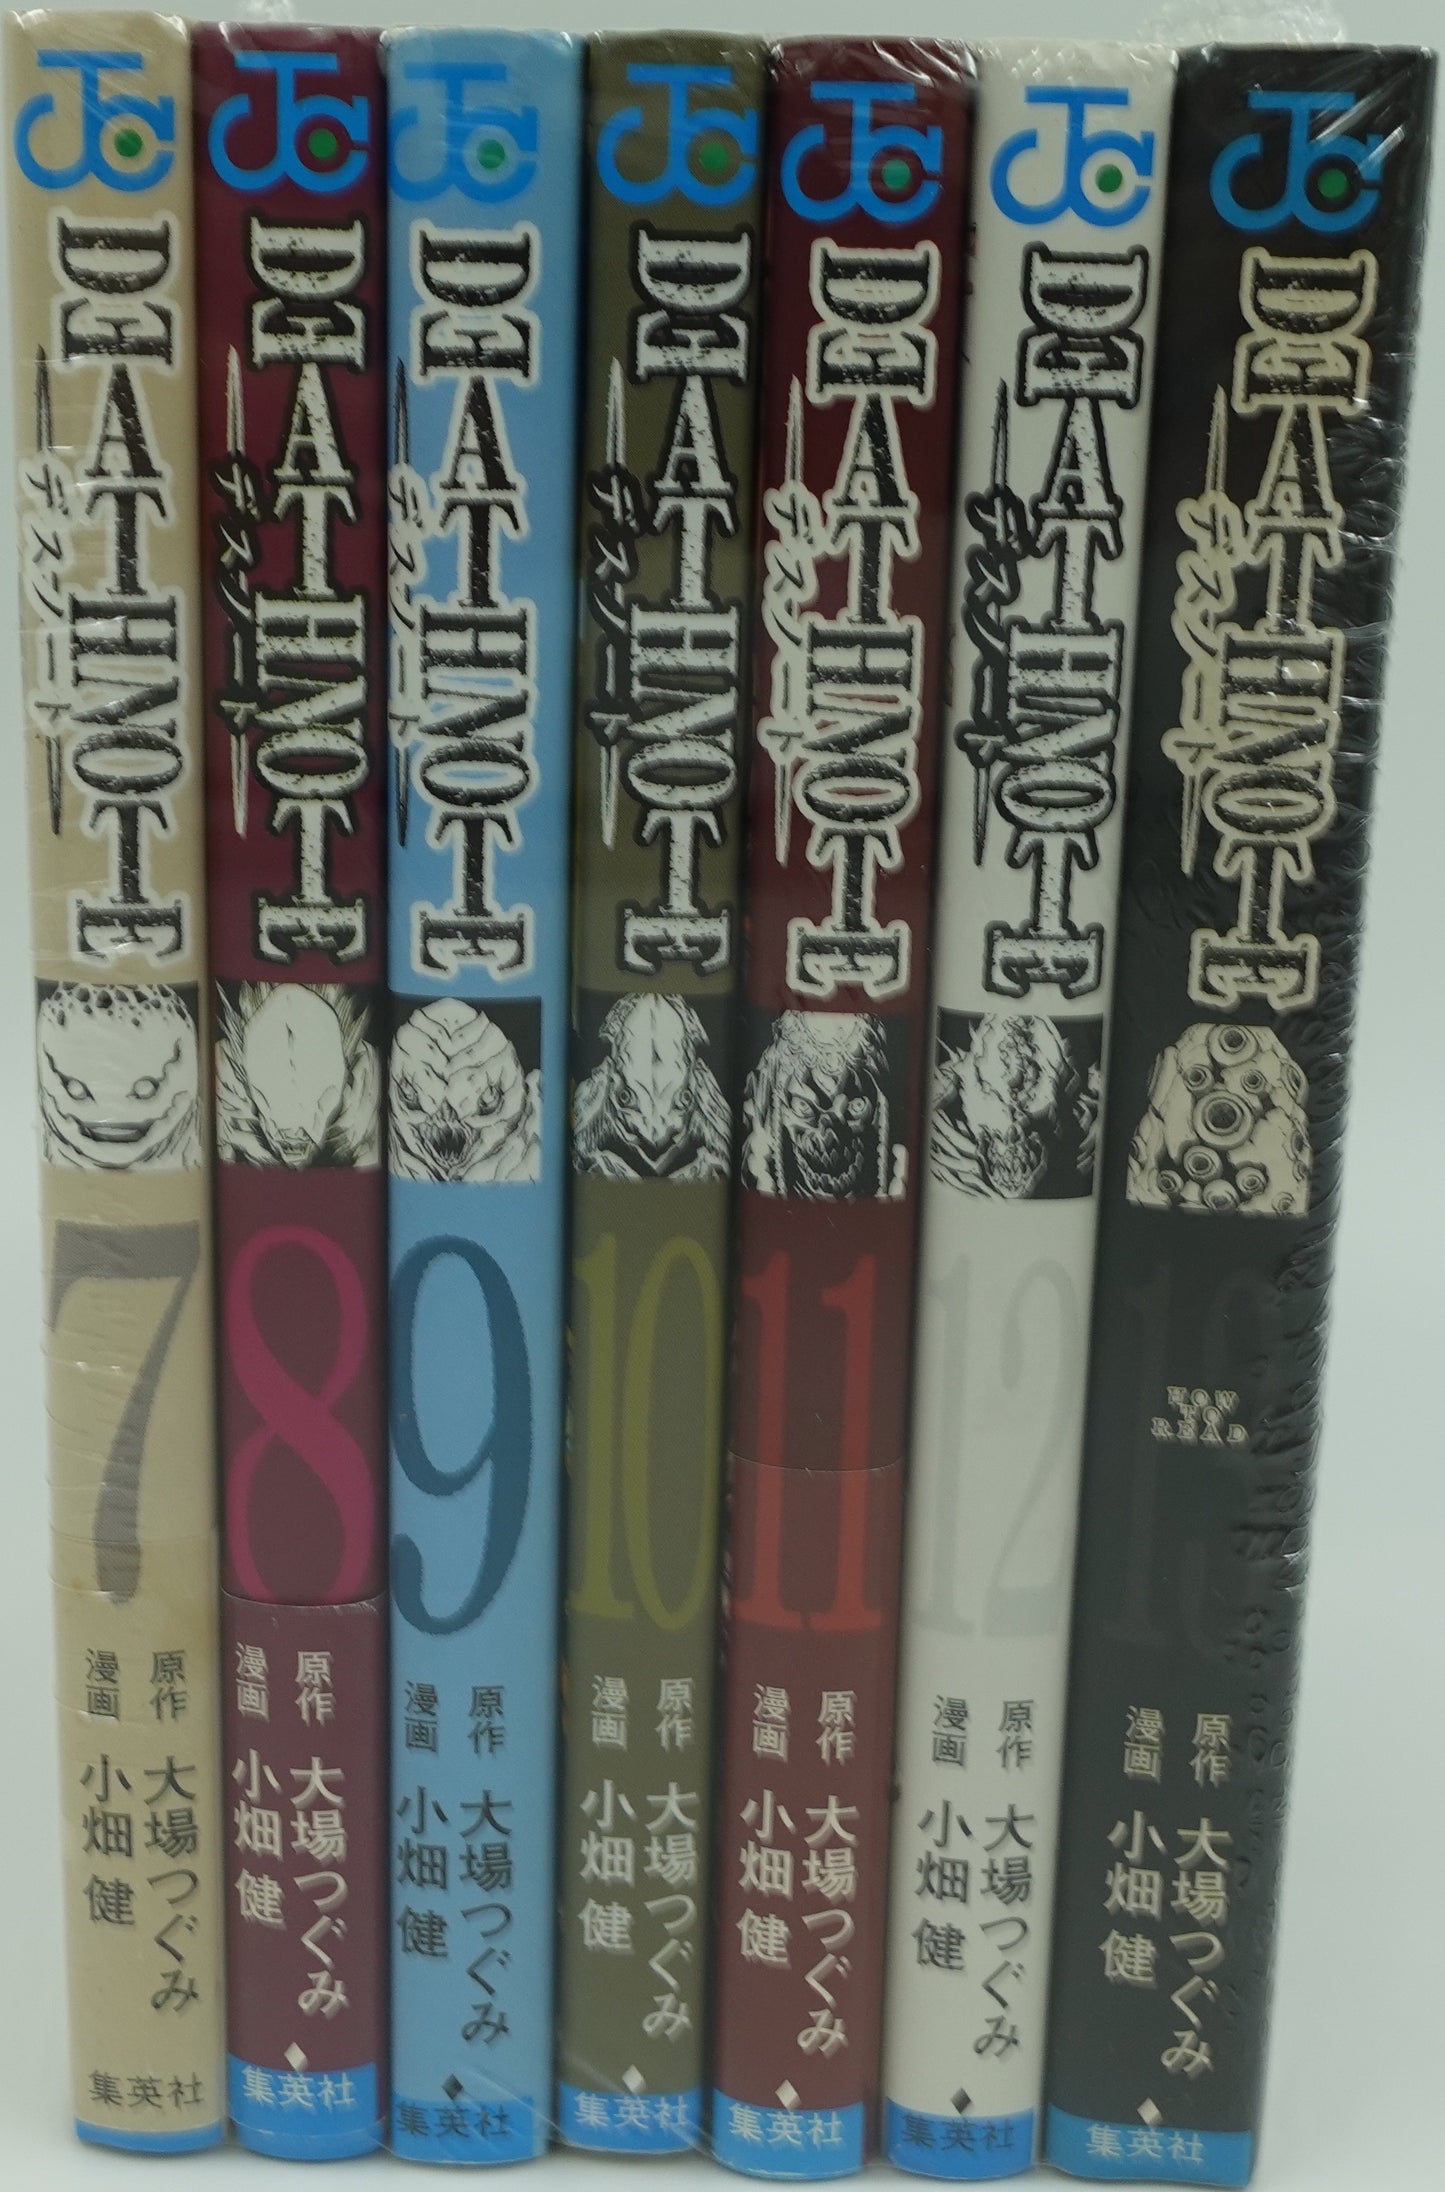 Death Note Vol.0-13 Set- Official Japanese Edition